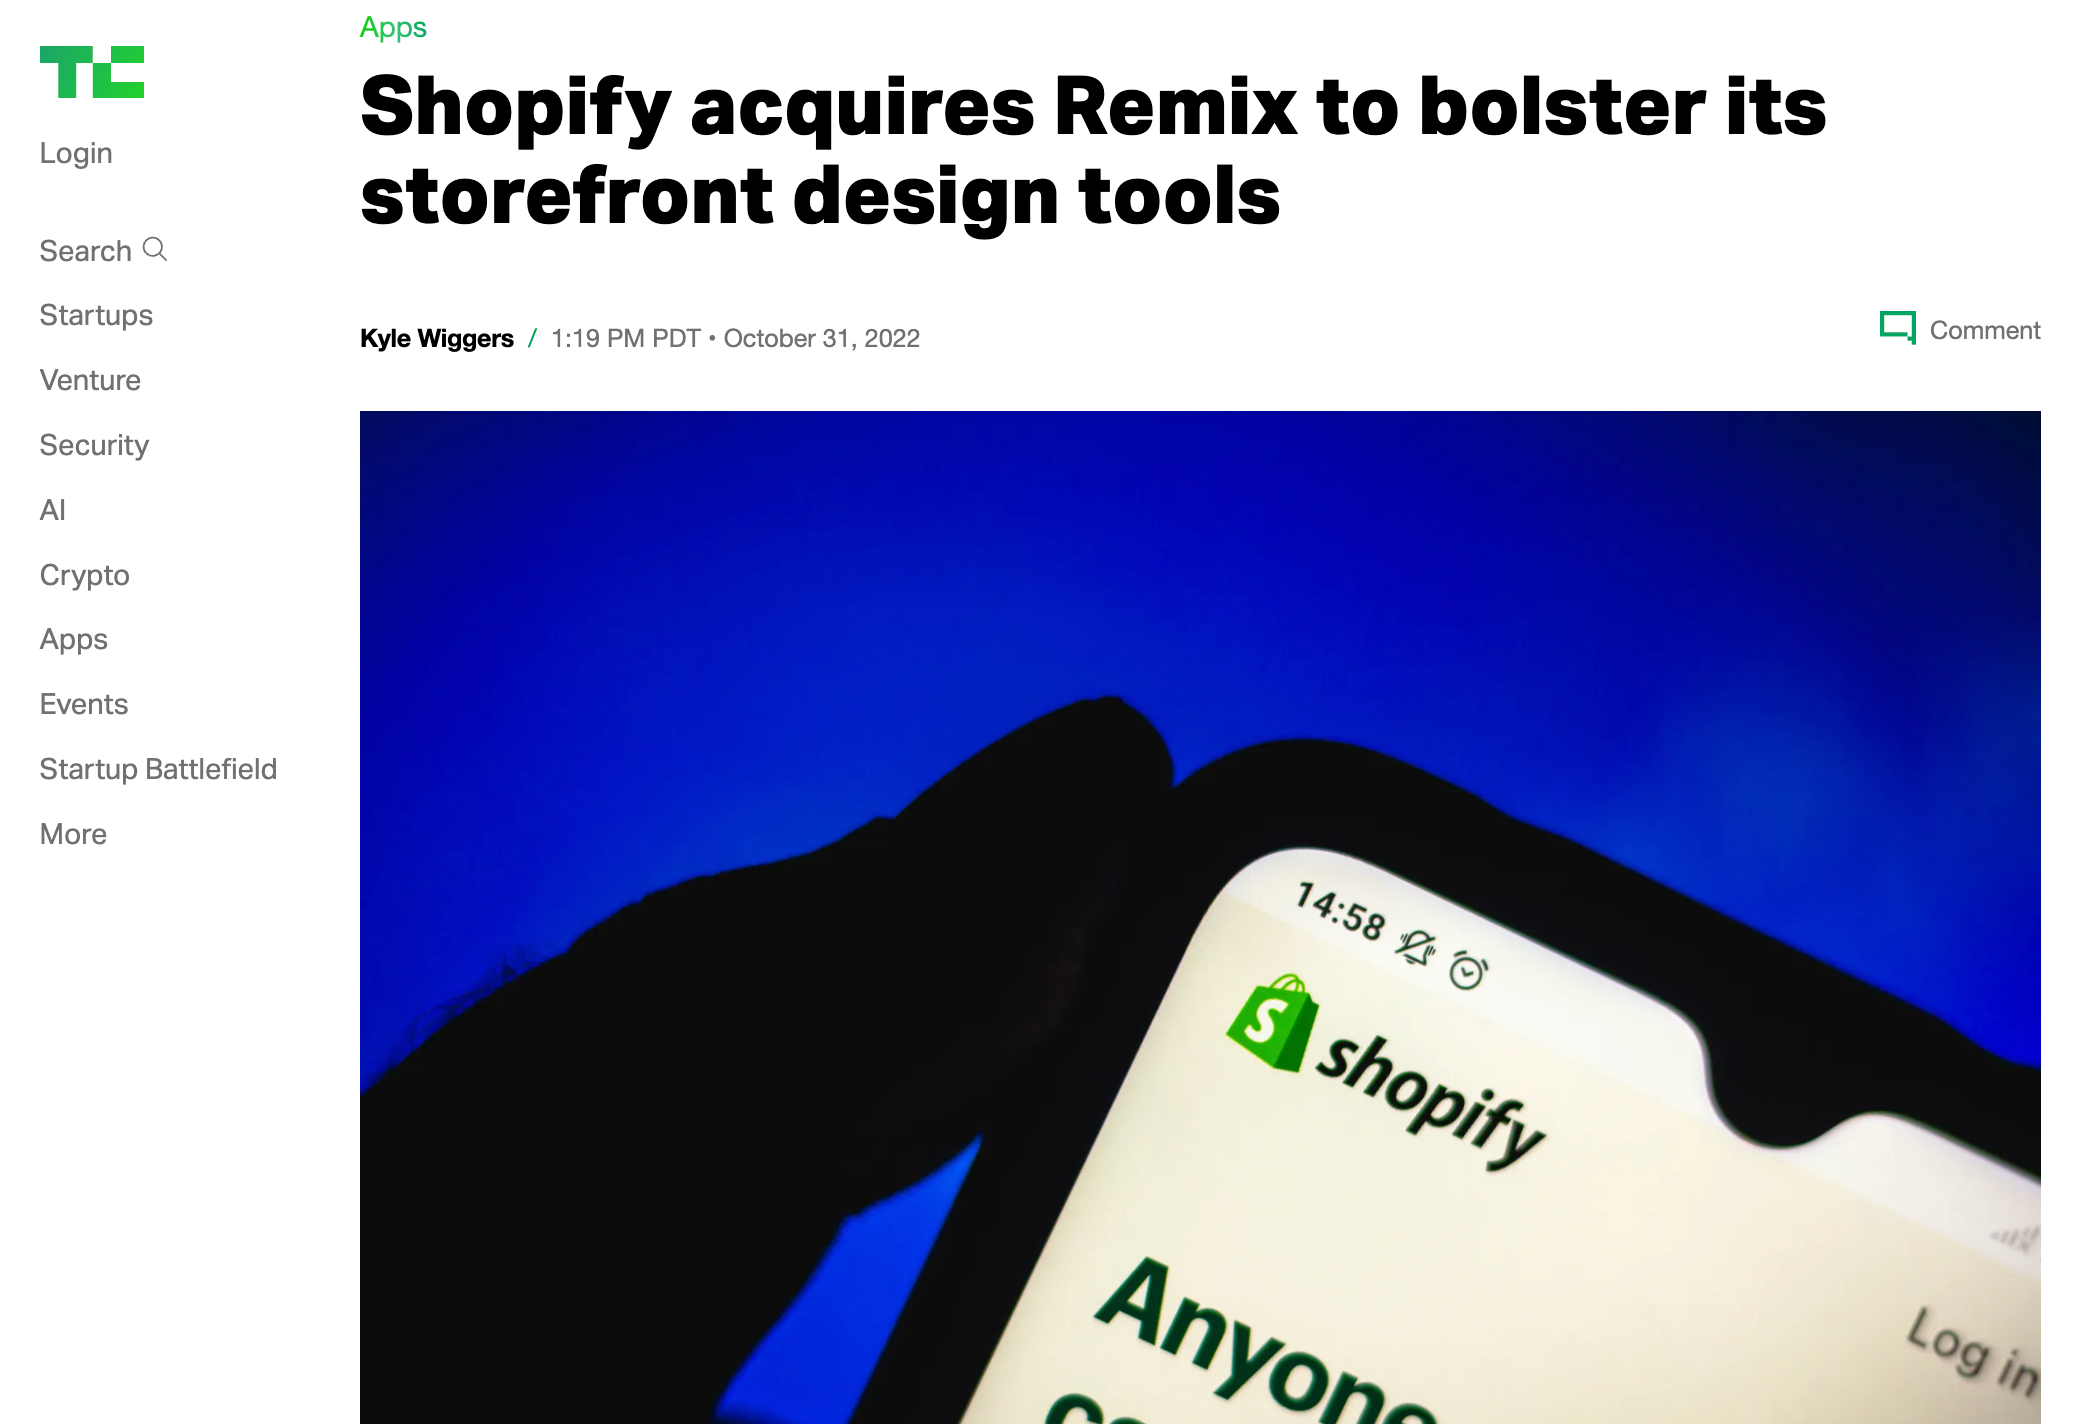 Shopfiy acquired Remix in late 2022